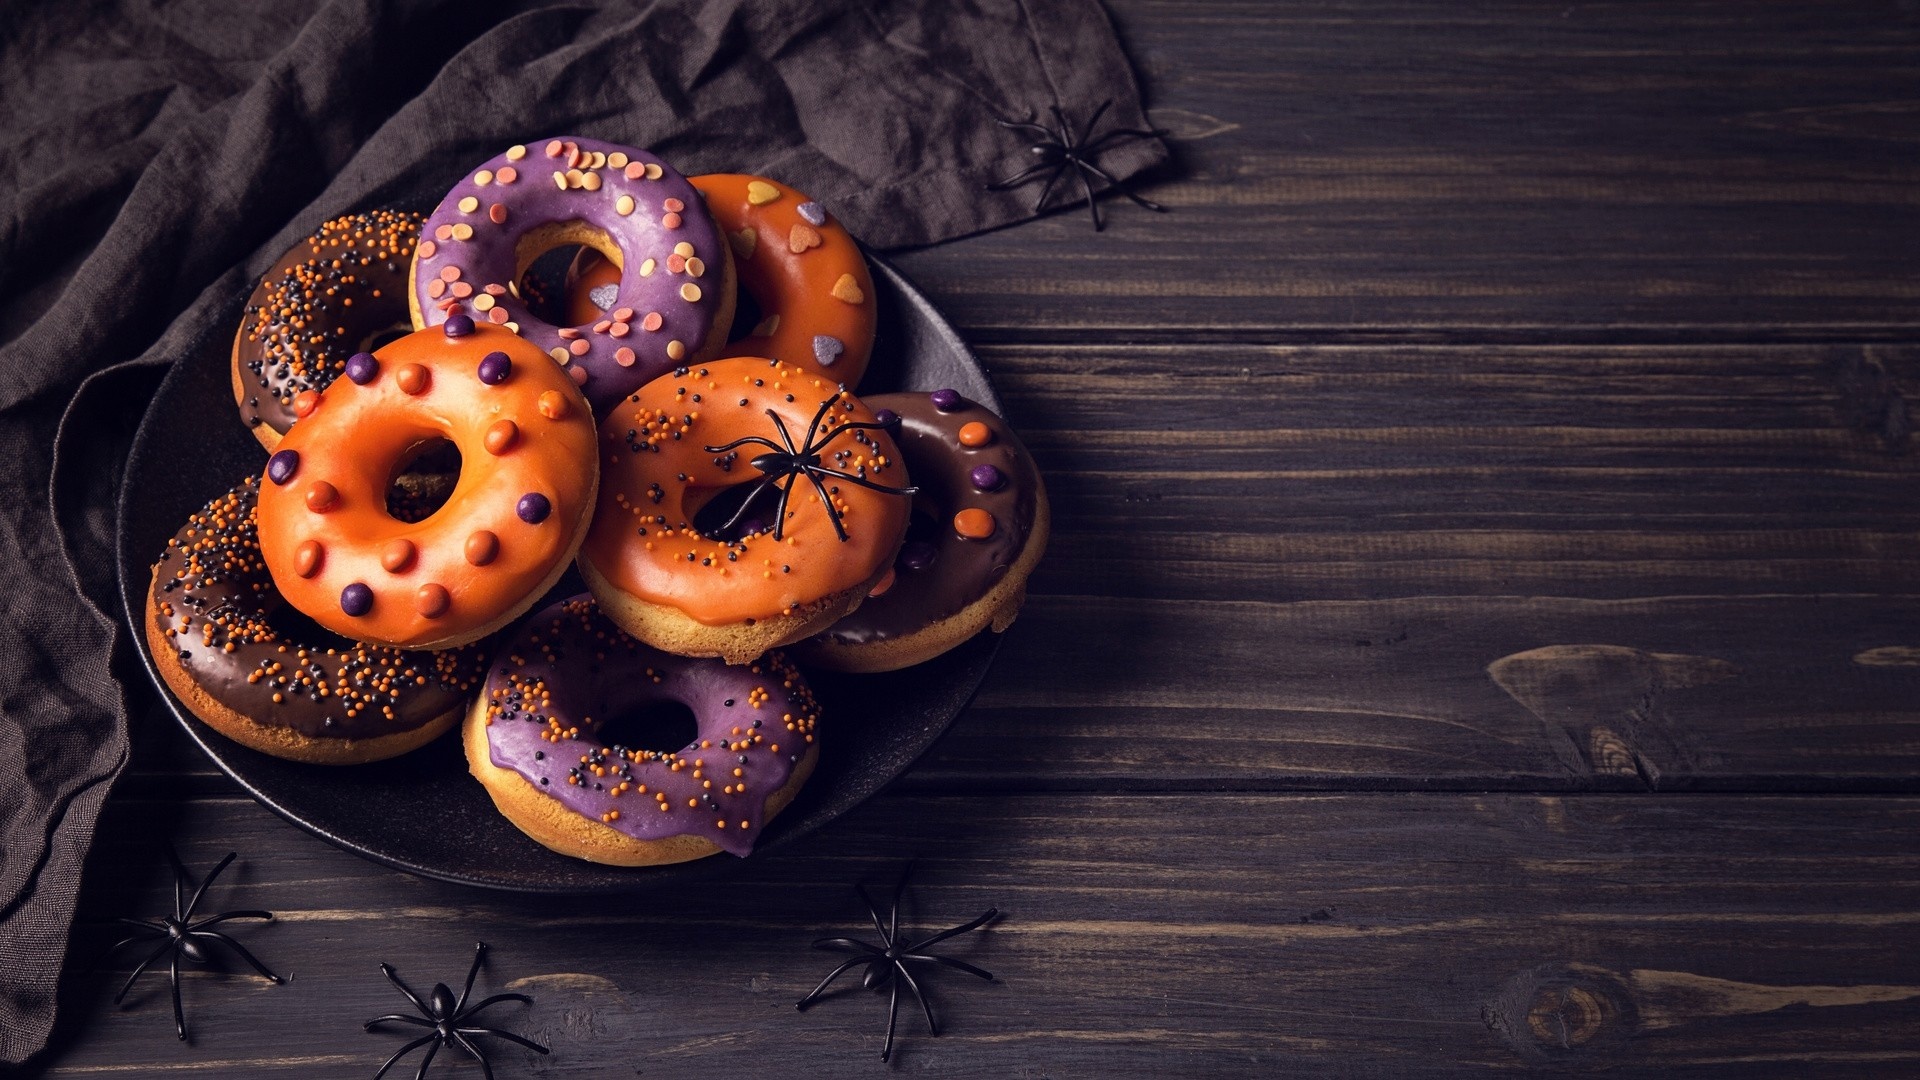 Donut: Made from a cake batter that uses a chemical leavening like baking soda or baking powder. 1920x1080 Full HD Background.